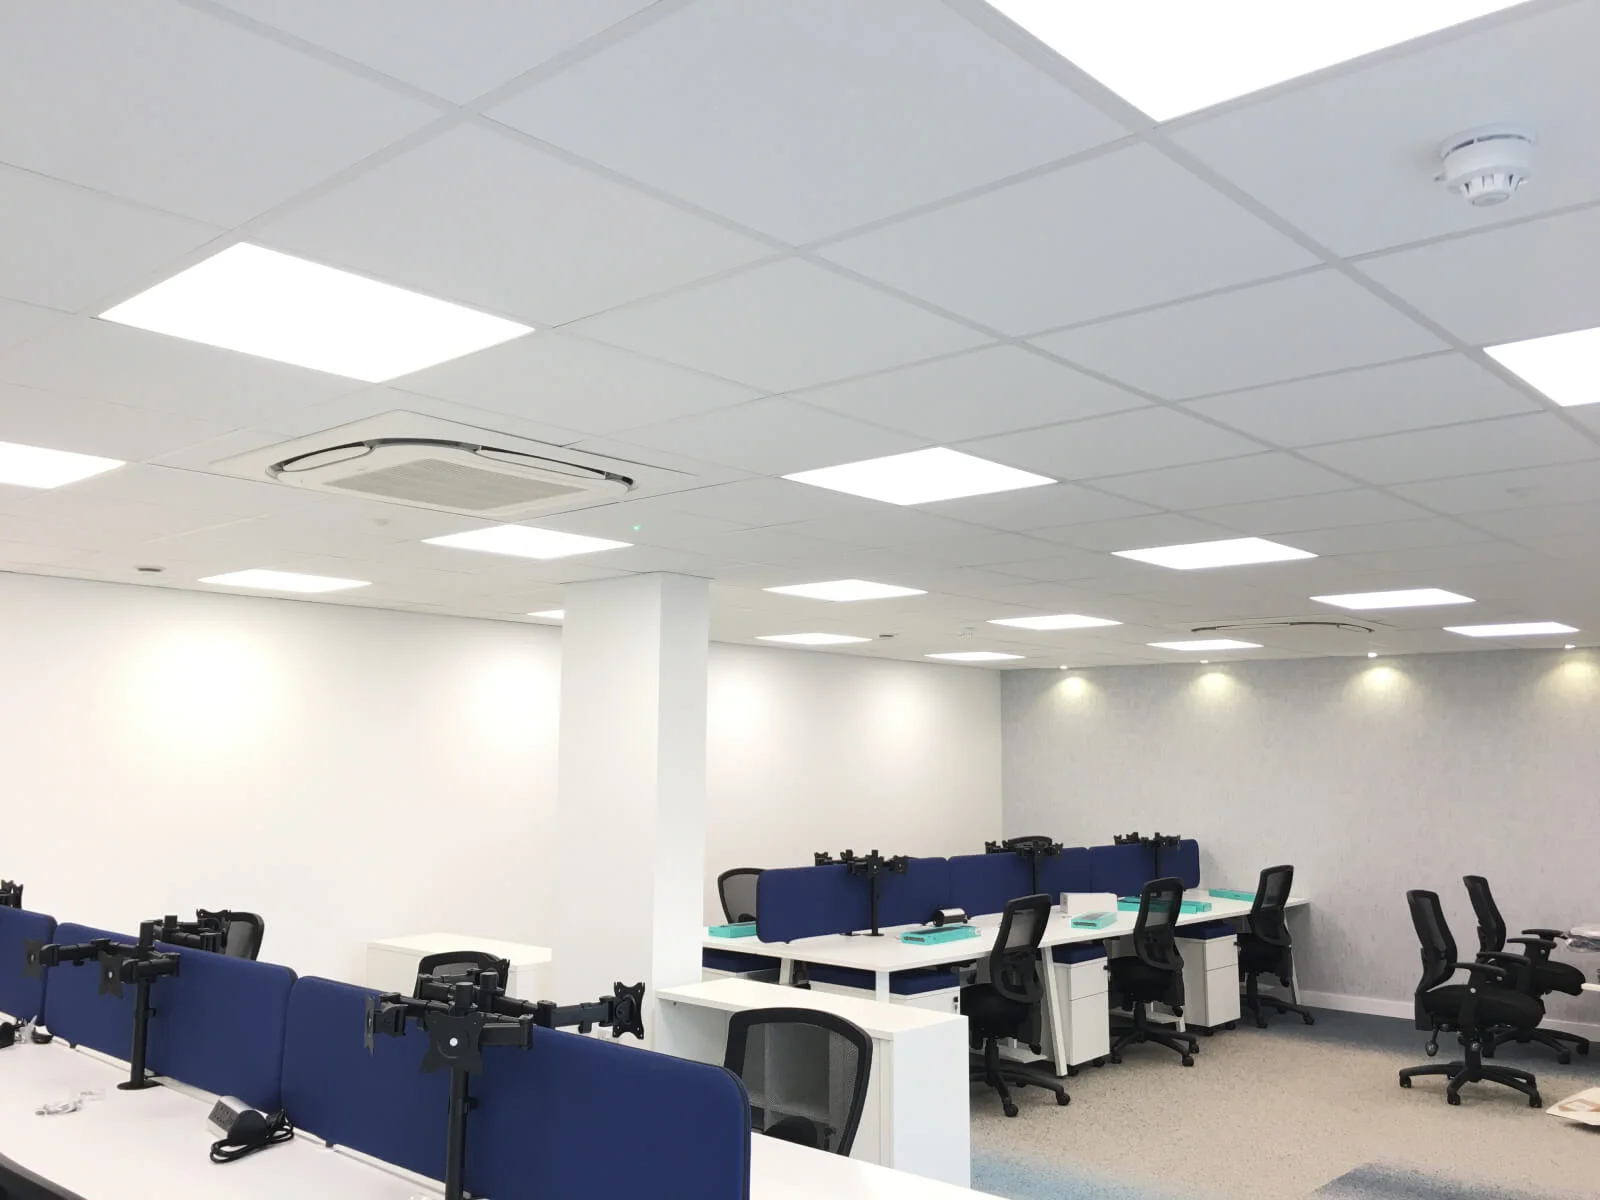 Office space with suspended grid ceiling 3